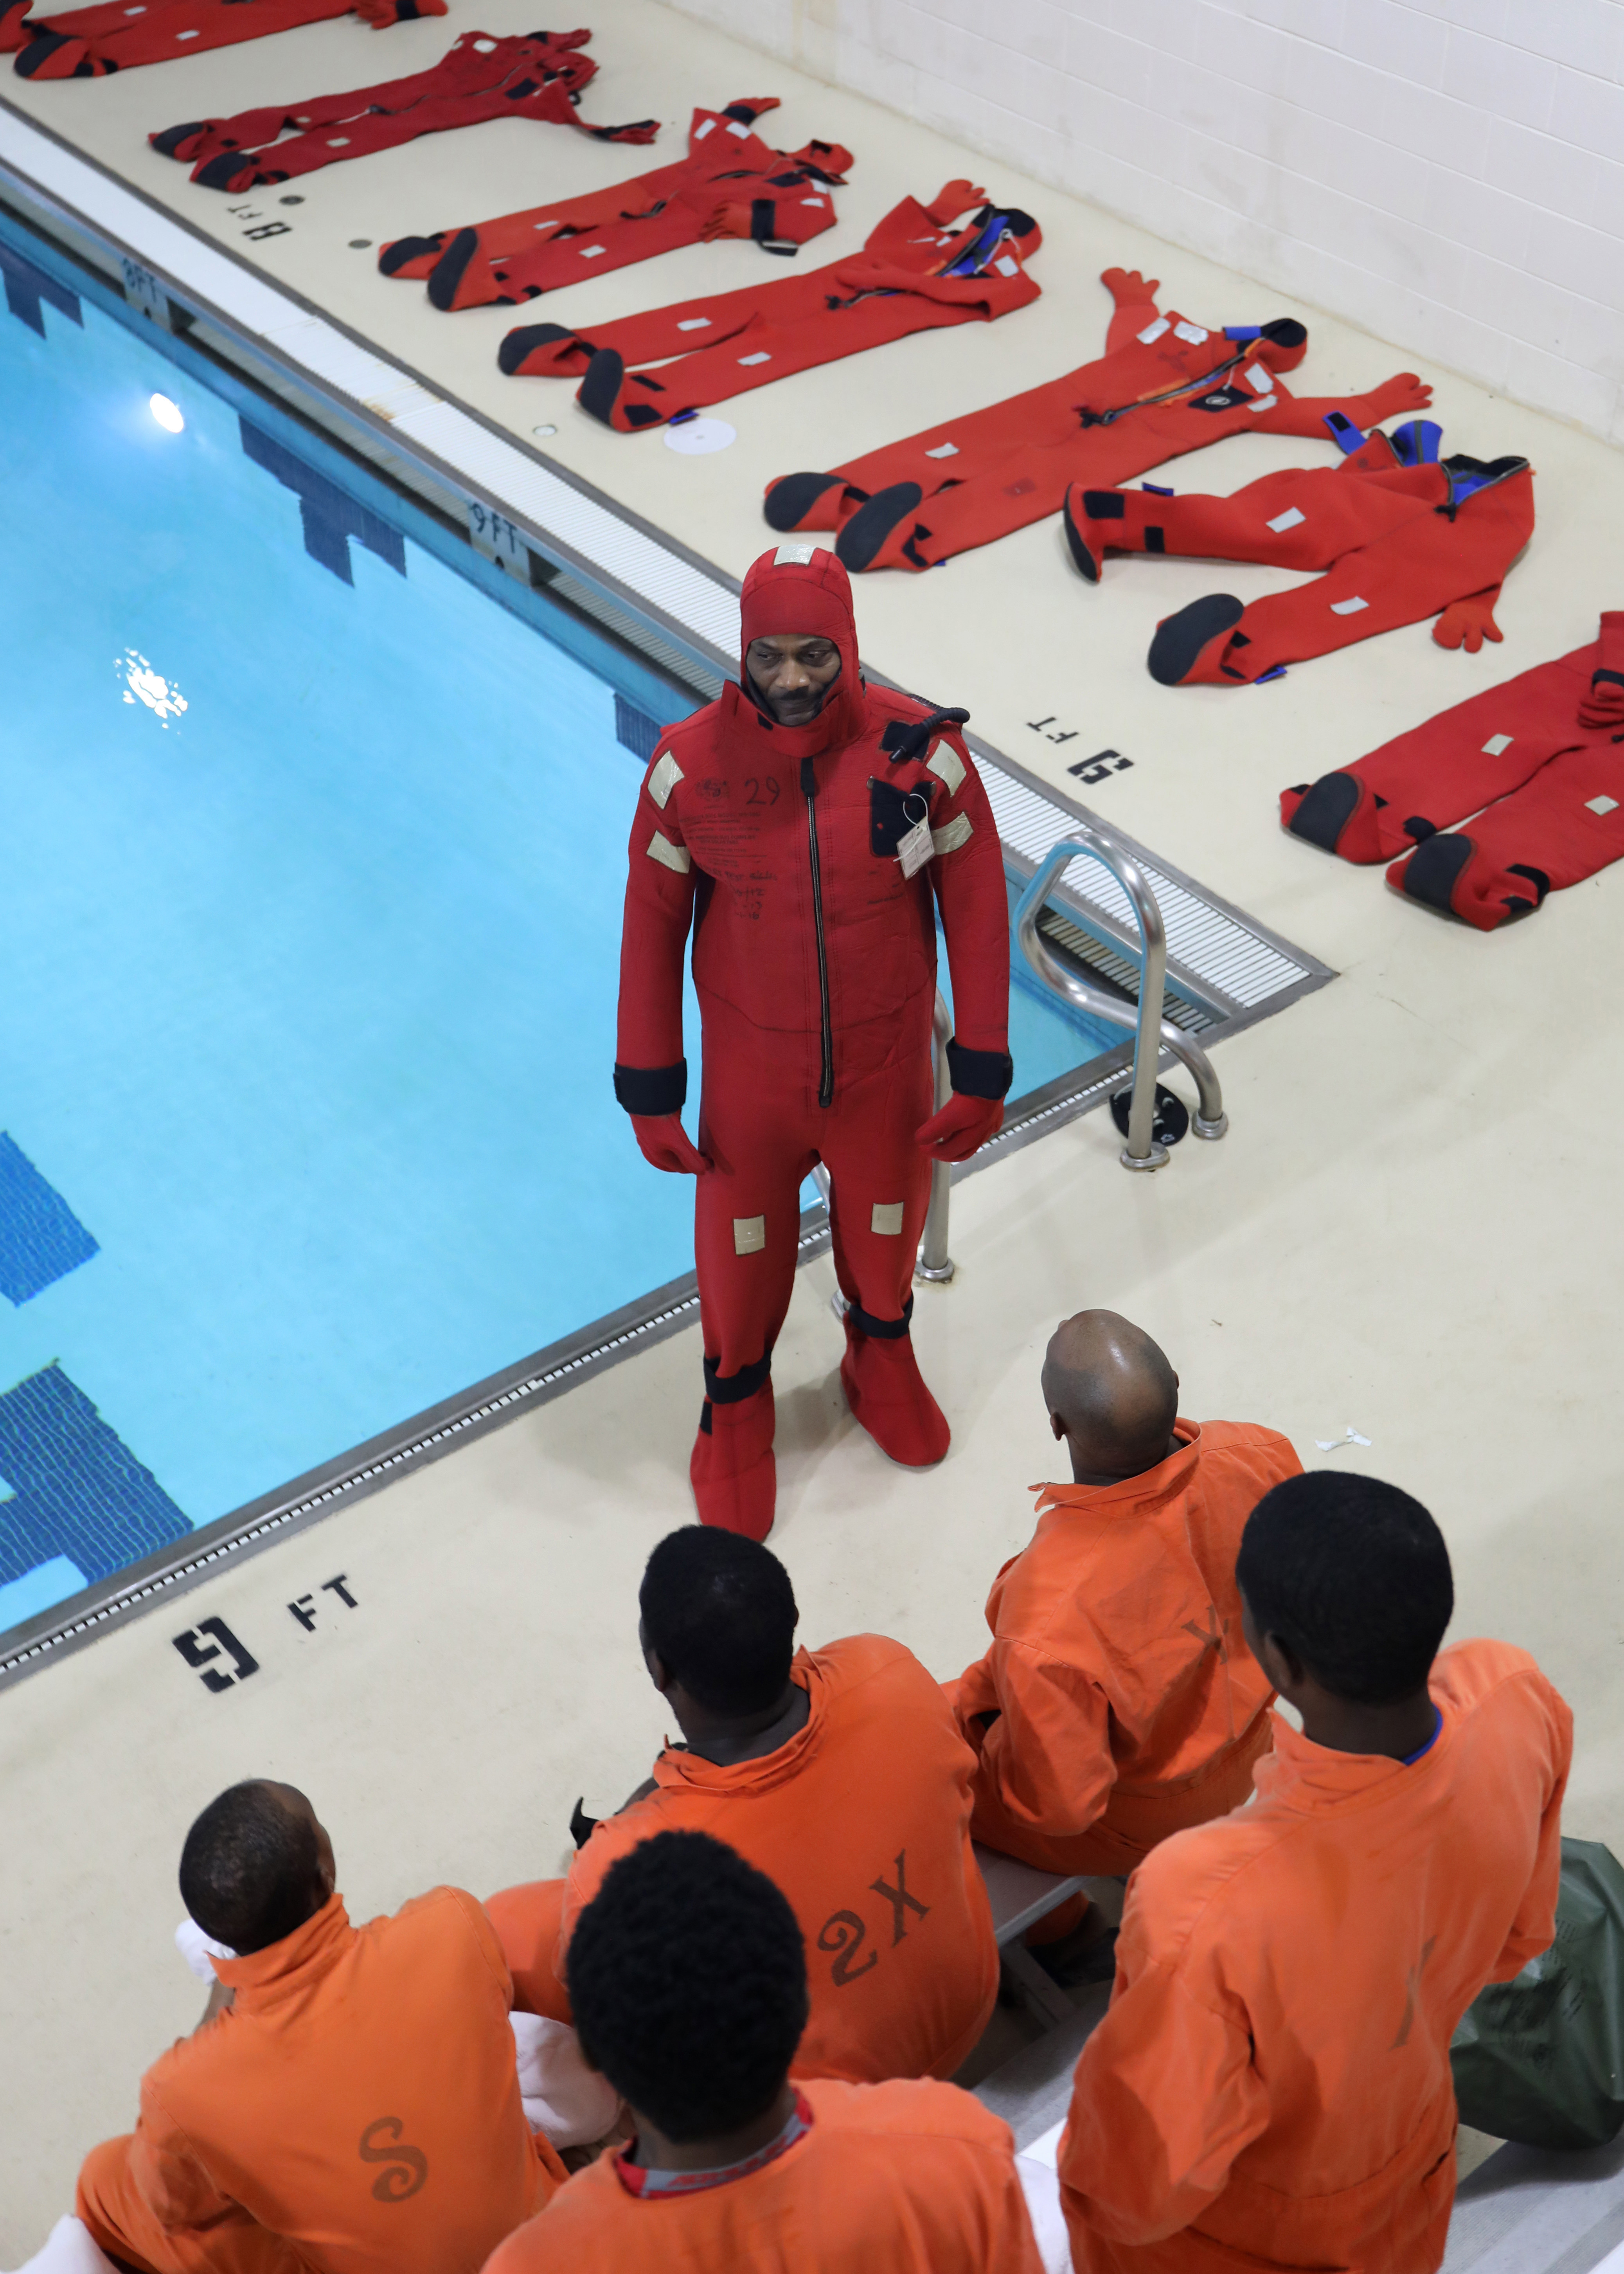 Andre Sutten, an instructor at Military Sealift Command Training Center East, demonstrates the proper donning of an at-sea survival suit to newly hired Civil Service Mariners (CIVMAR) during an abandon ship scenario at the training center on Joint Base Langley-Fort Eustis, Virginia, Feb. 25.